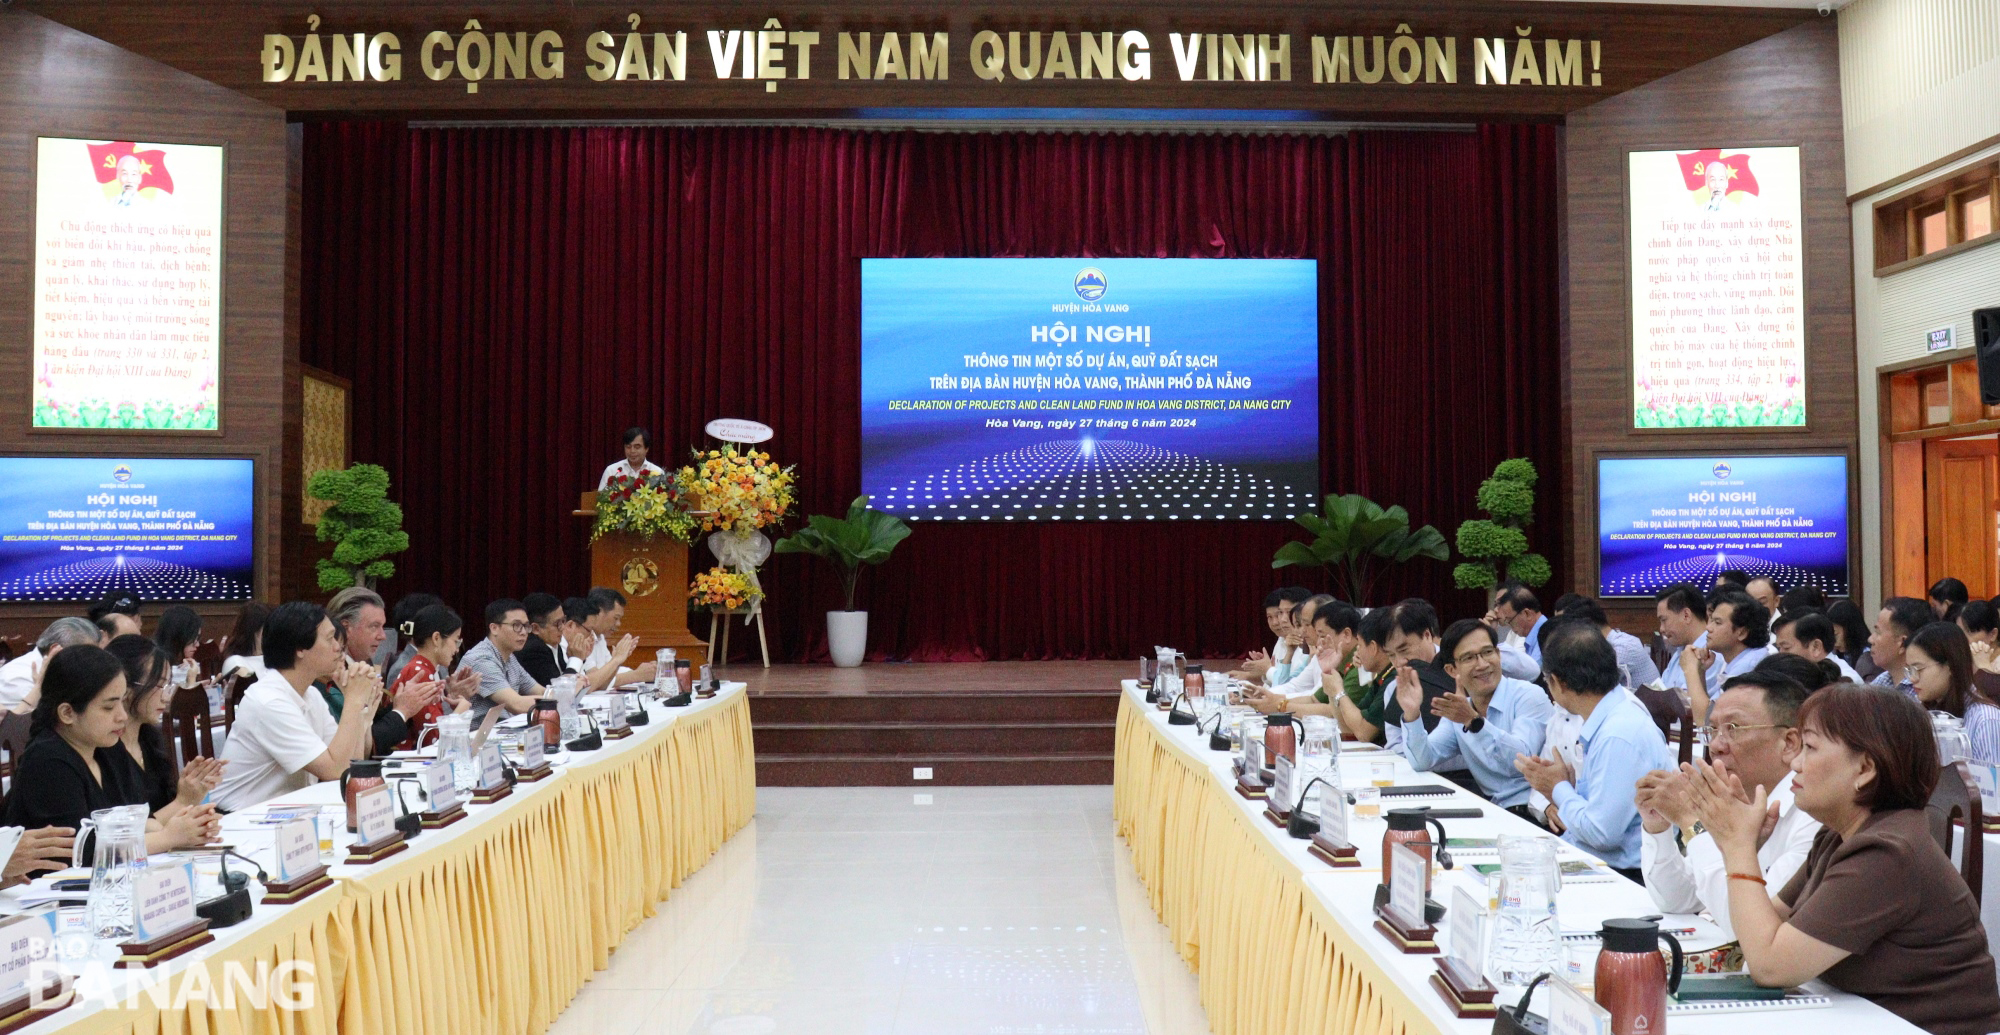 The Hoa Vang District People's Committee coordinated with the Da Nang Investment Promotion and Support Board to organize a meeting on Thursday to inform about a number of projects and clean land funds in the district. Photo: HOANG HIEP